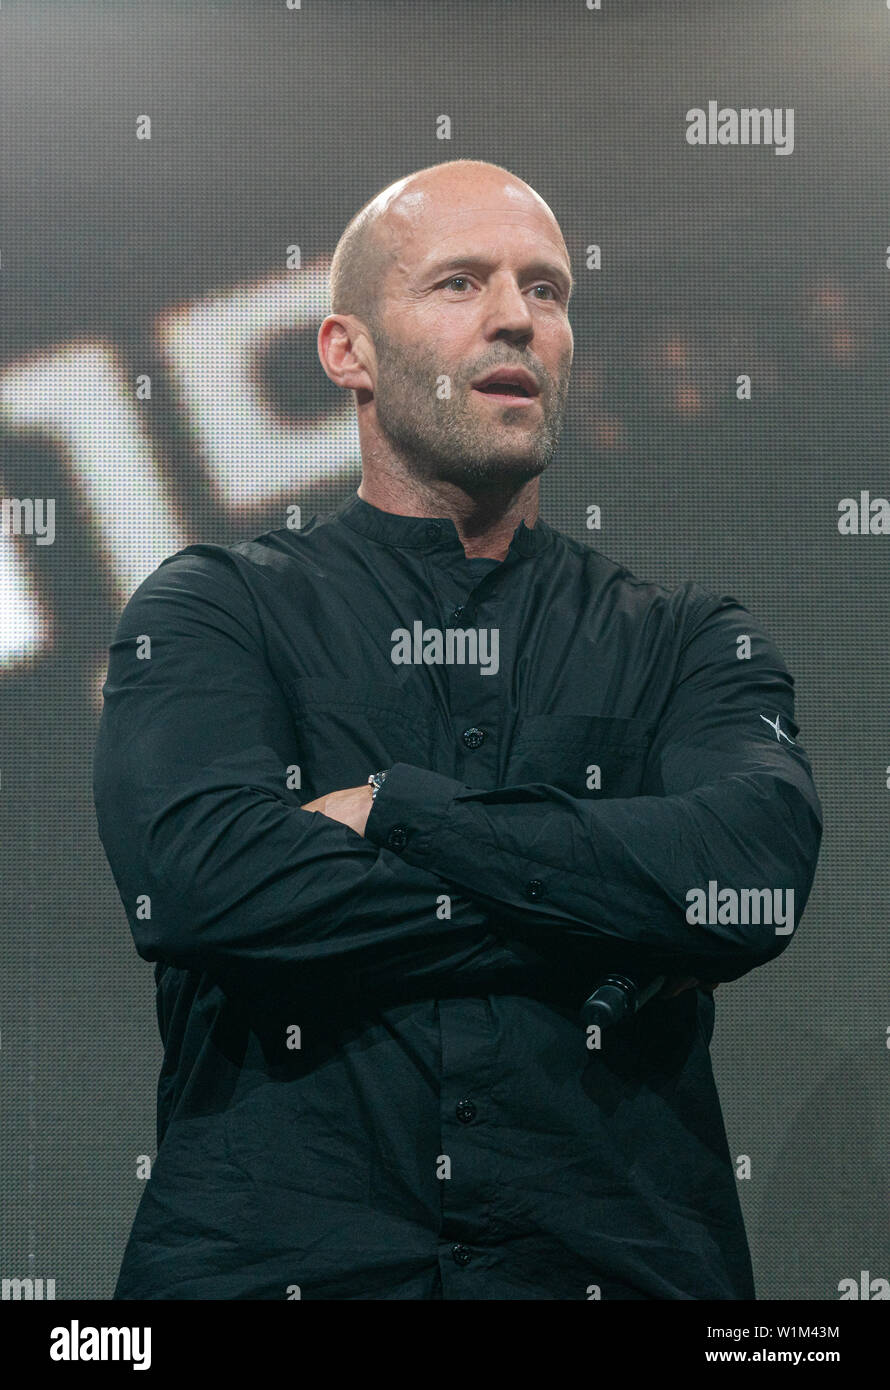 COLOGNE, GERMANY - JUN 28th 2019: Jason Statham (*1967, English actor, film producer, martial artist and former diver) , world premiere of the final movie trailer for & Furious Hobbs &